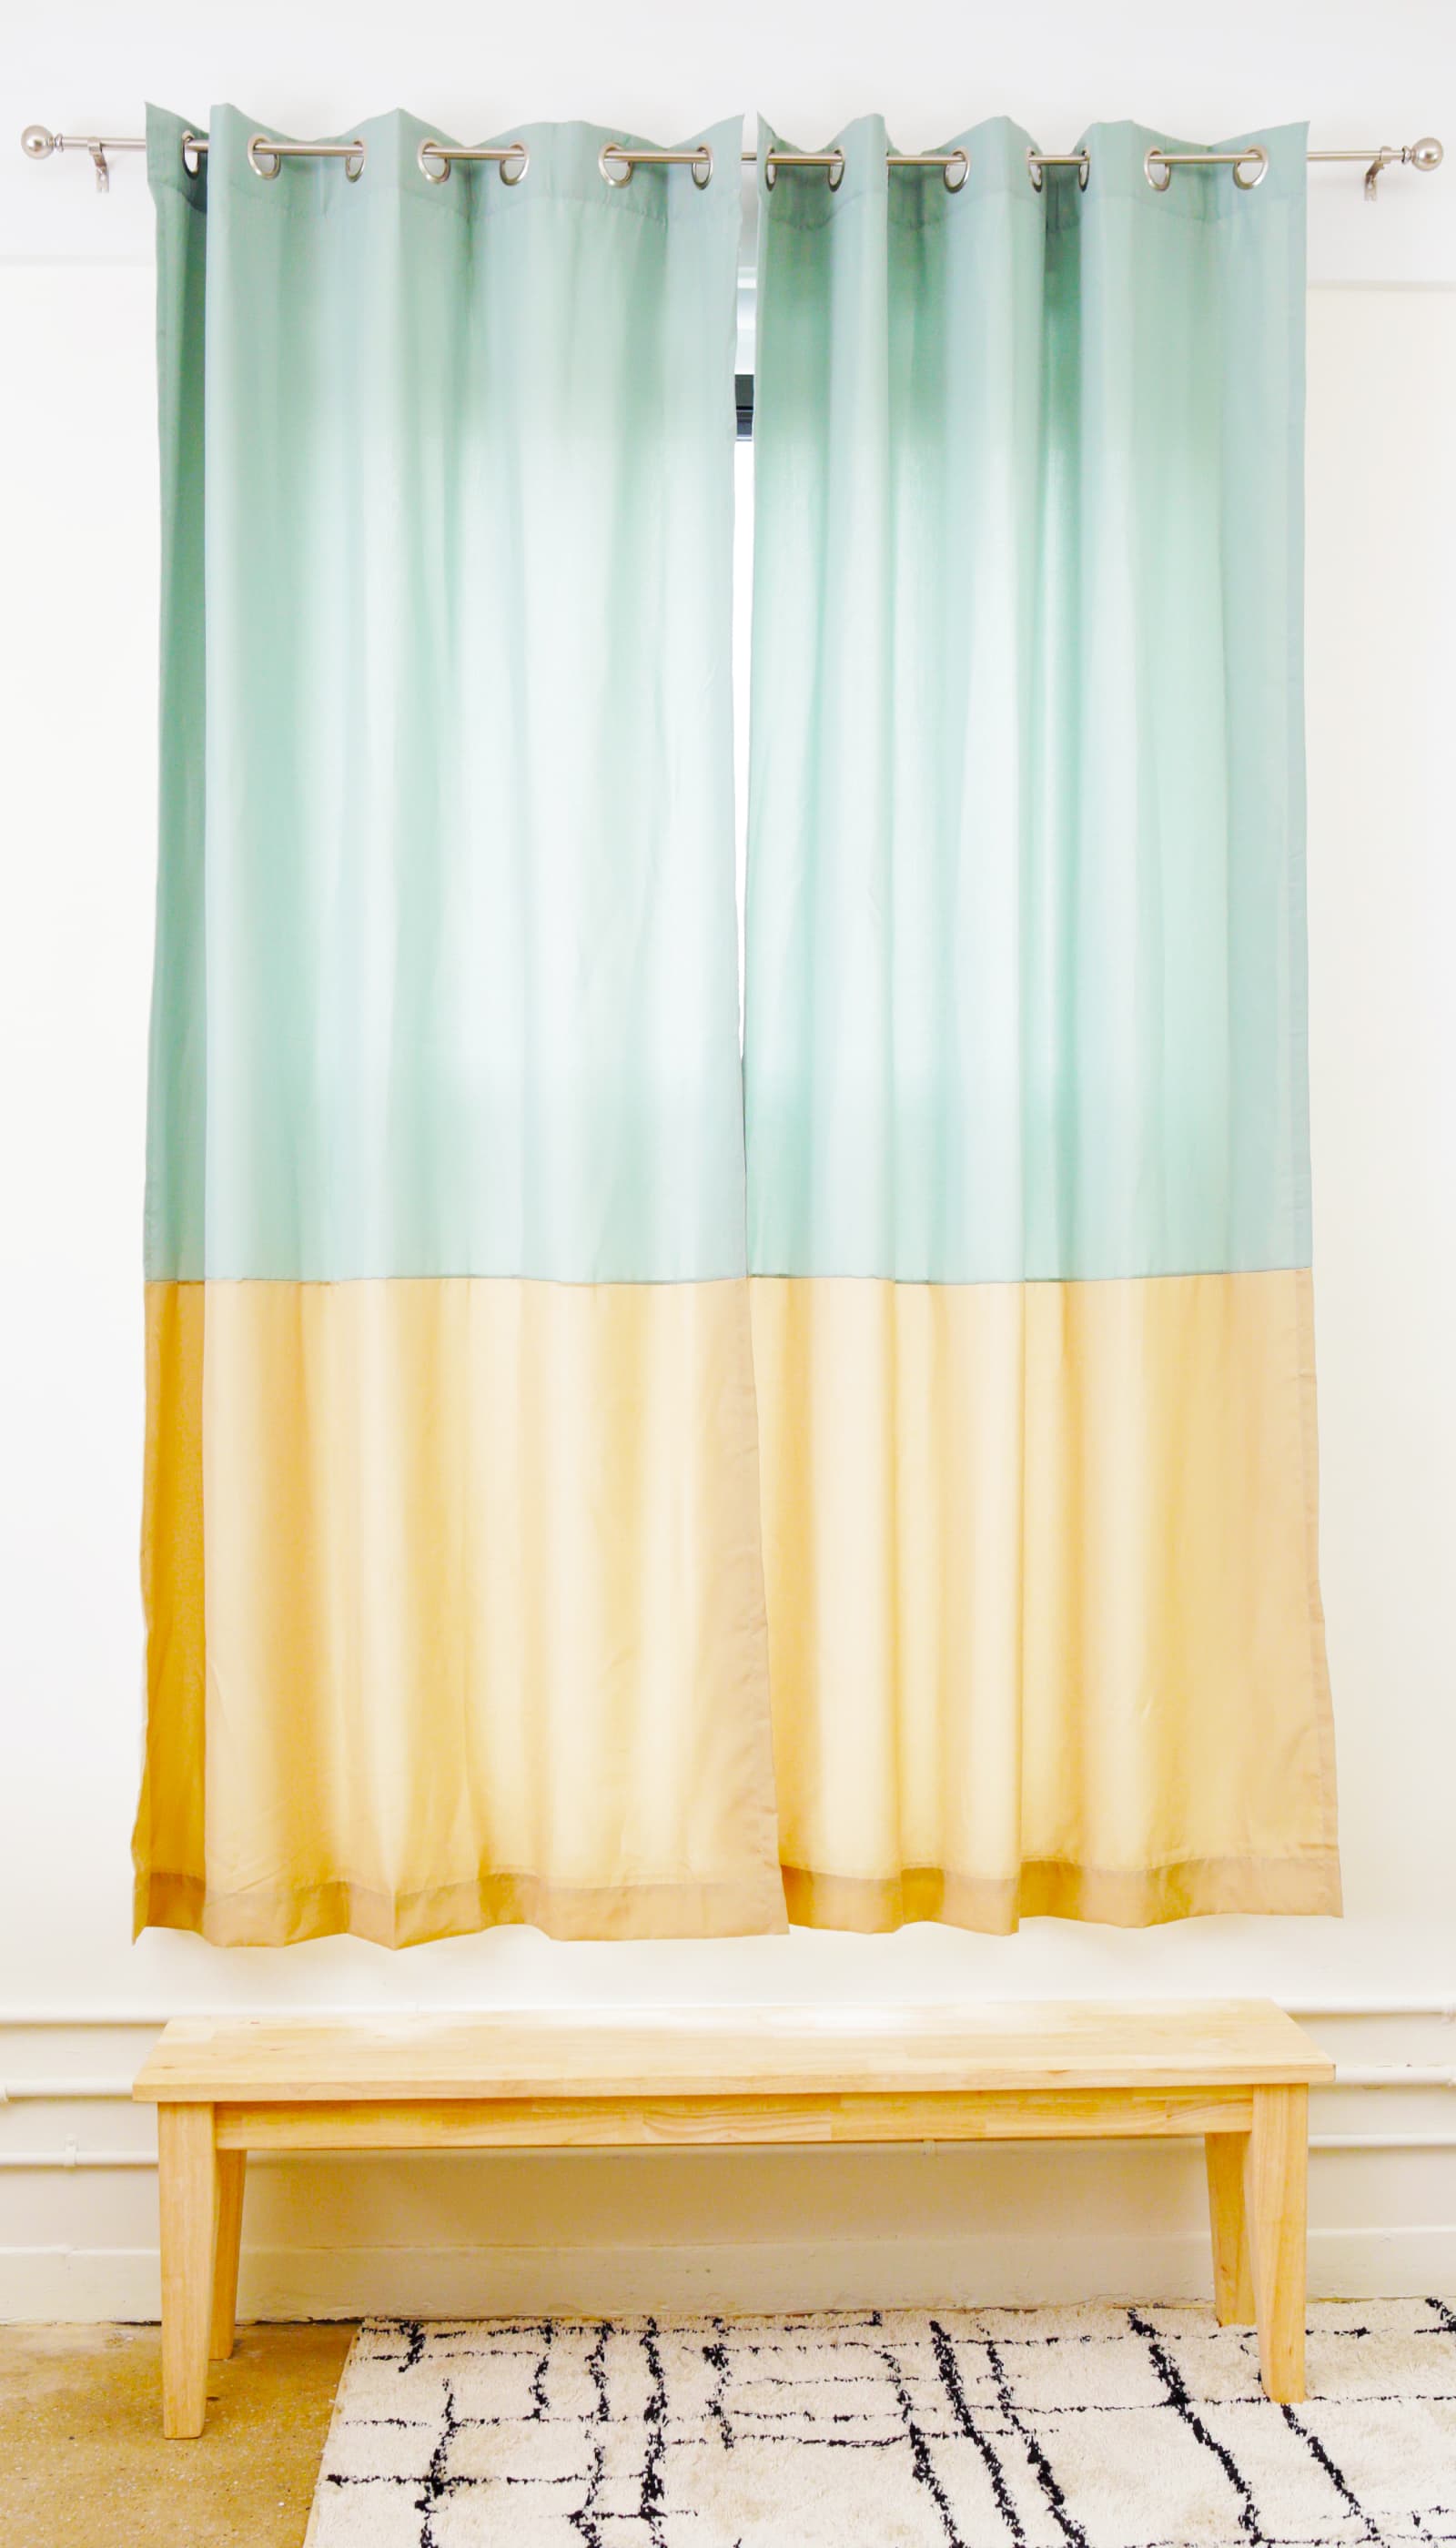 How to Hang Curtains from the Ceiling: 14 Steps (with Pictures)